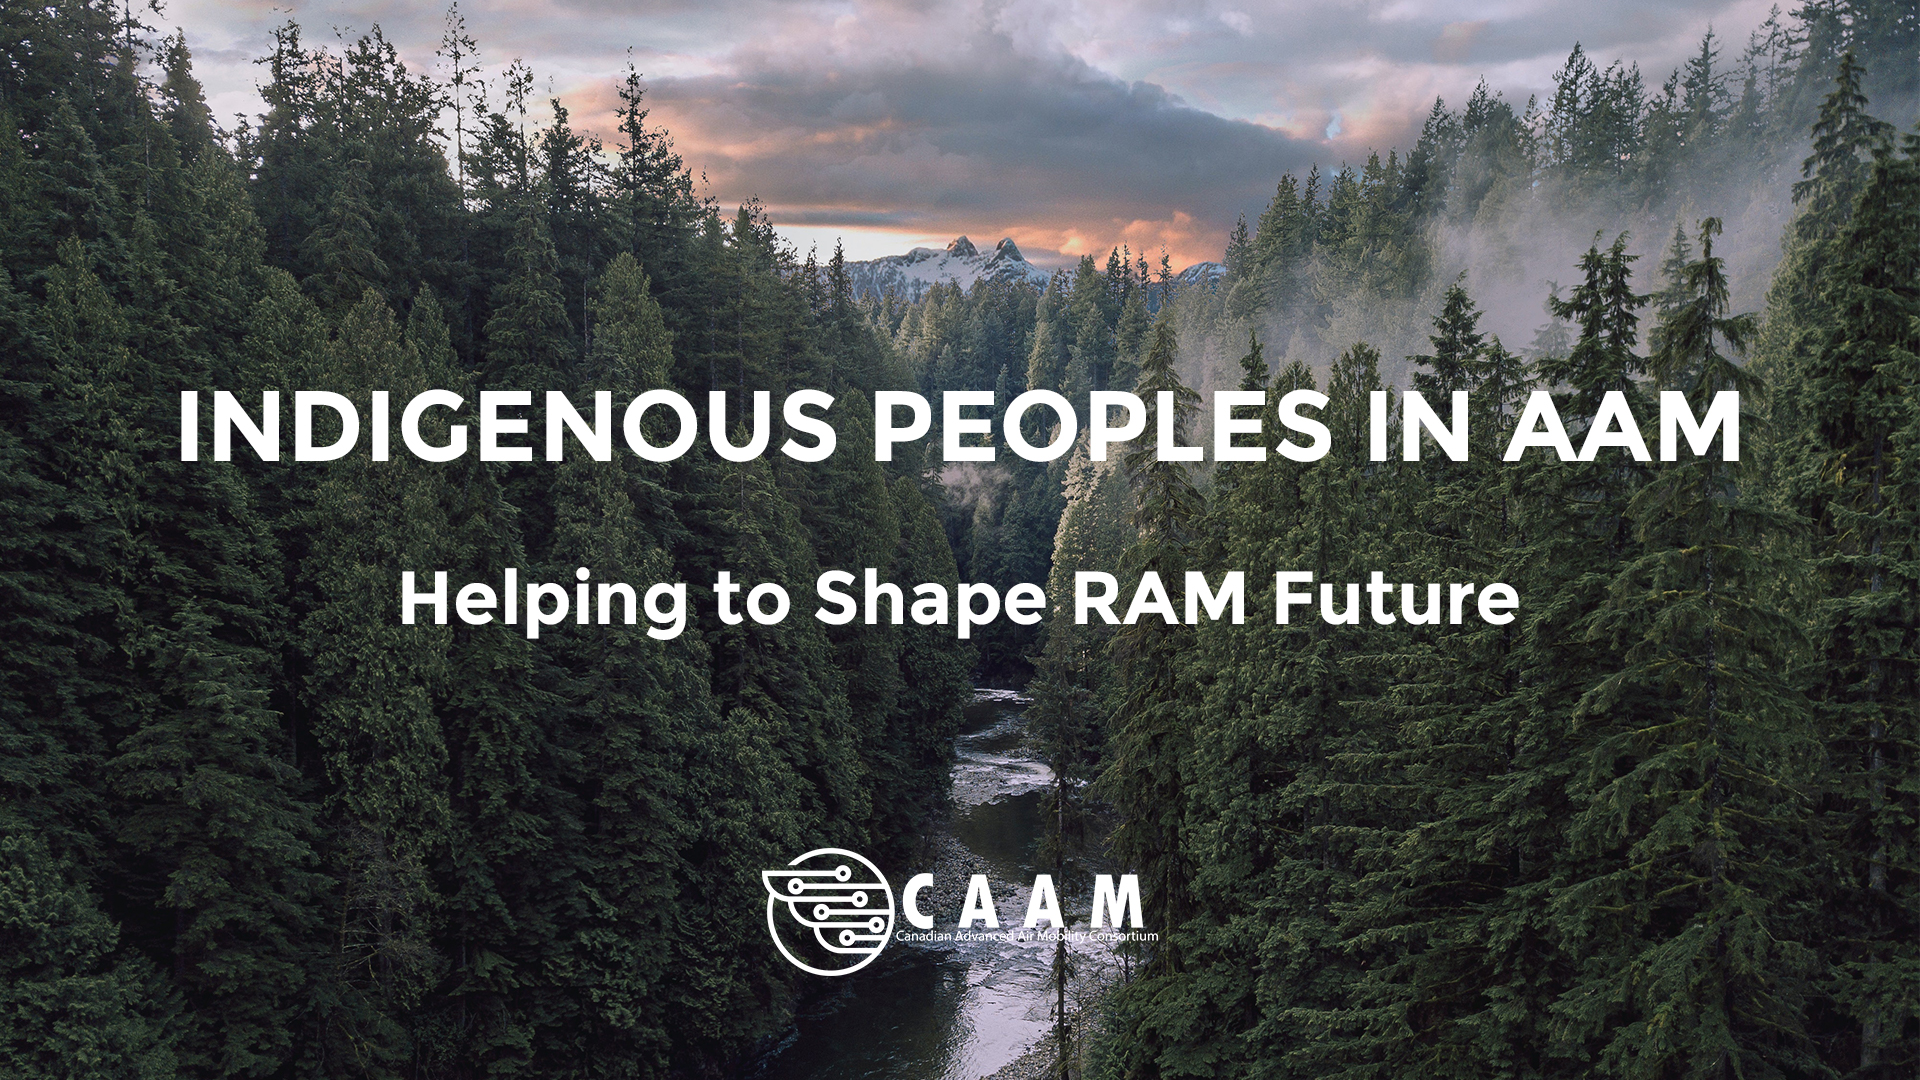 Indigenous Peoples in AAM: Shaping the future of RAM